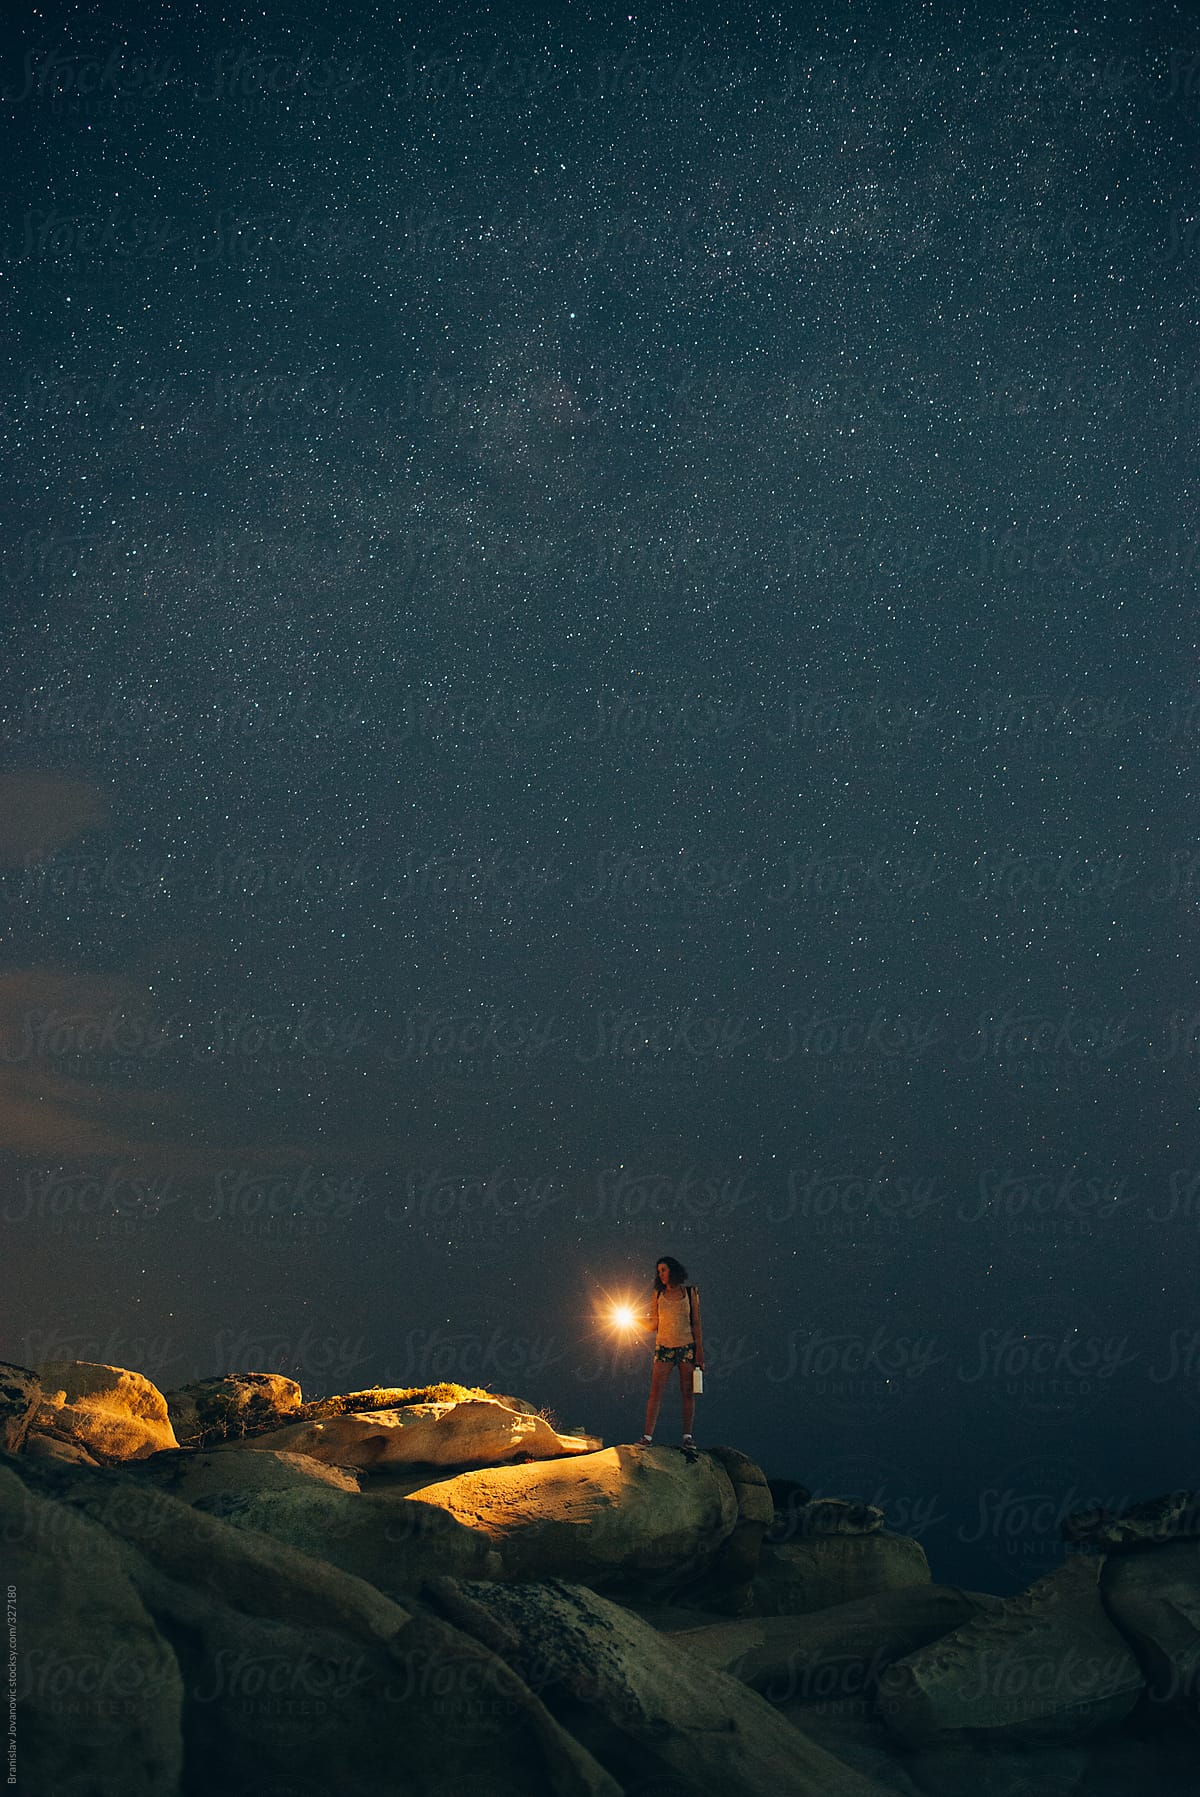 Woman With Flashlight On The Rocky Beach Under The Starry Night Sky